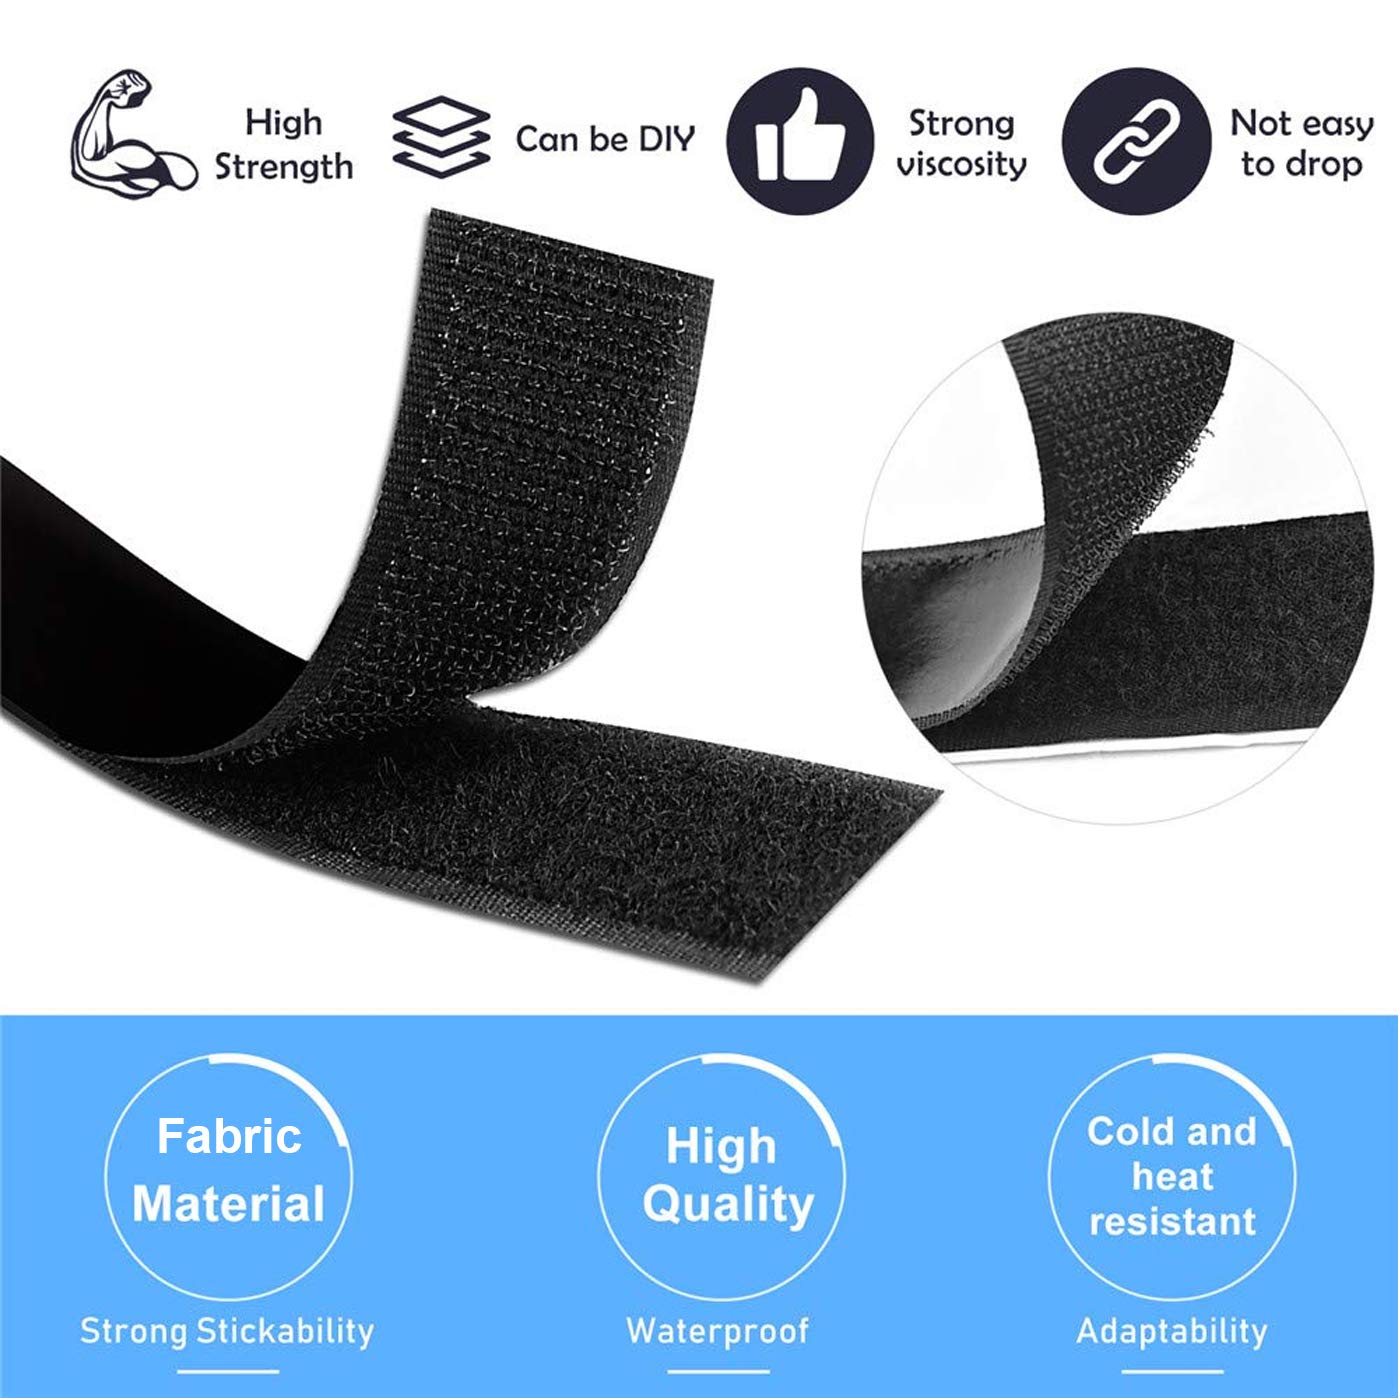 Self Adhesive Hook Tape & loop tape for Stationary, Pictures, Tools and more... - Black color (25mm) LifeKrafts